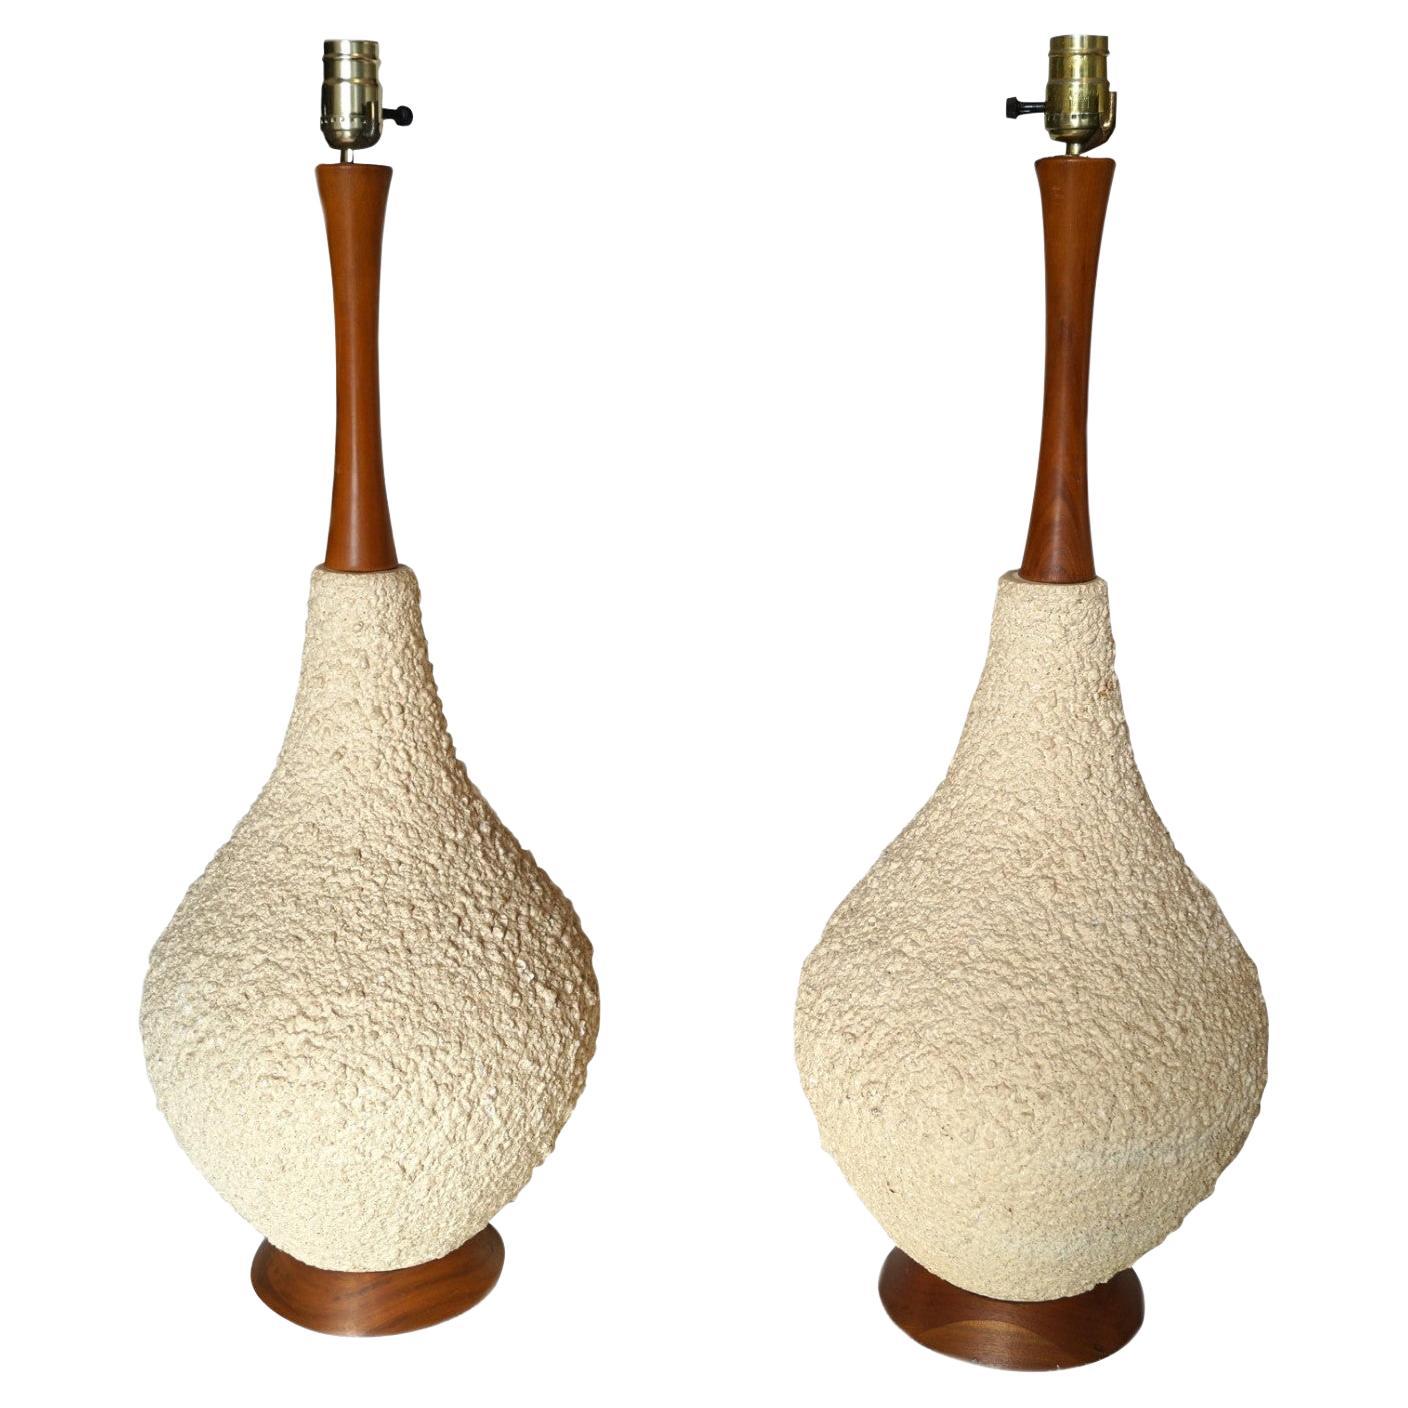 Mid-Century Modern large popcorn teak table lamps. These are currently an off white which is close to a Navajo white with tiny dark specks. You could have them painted to match your decore